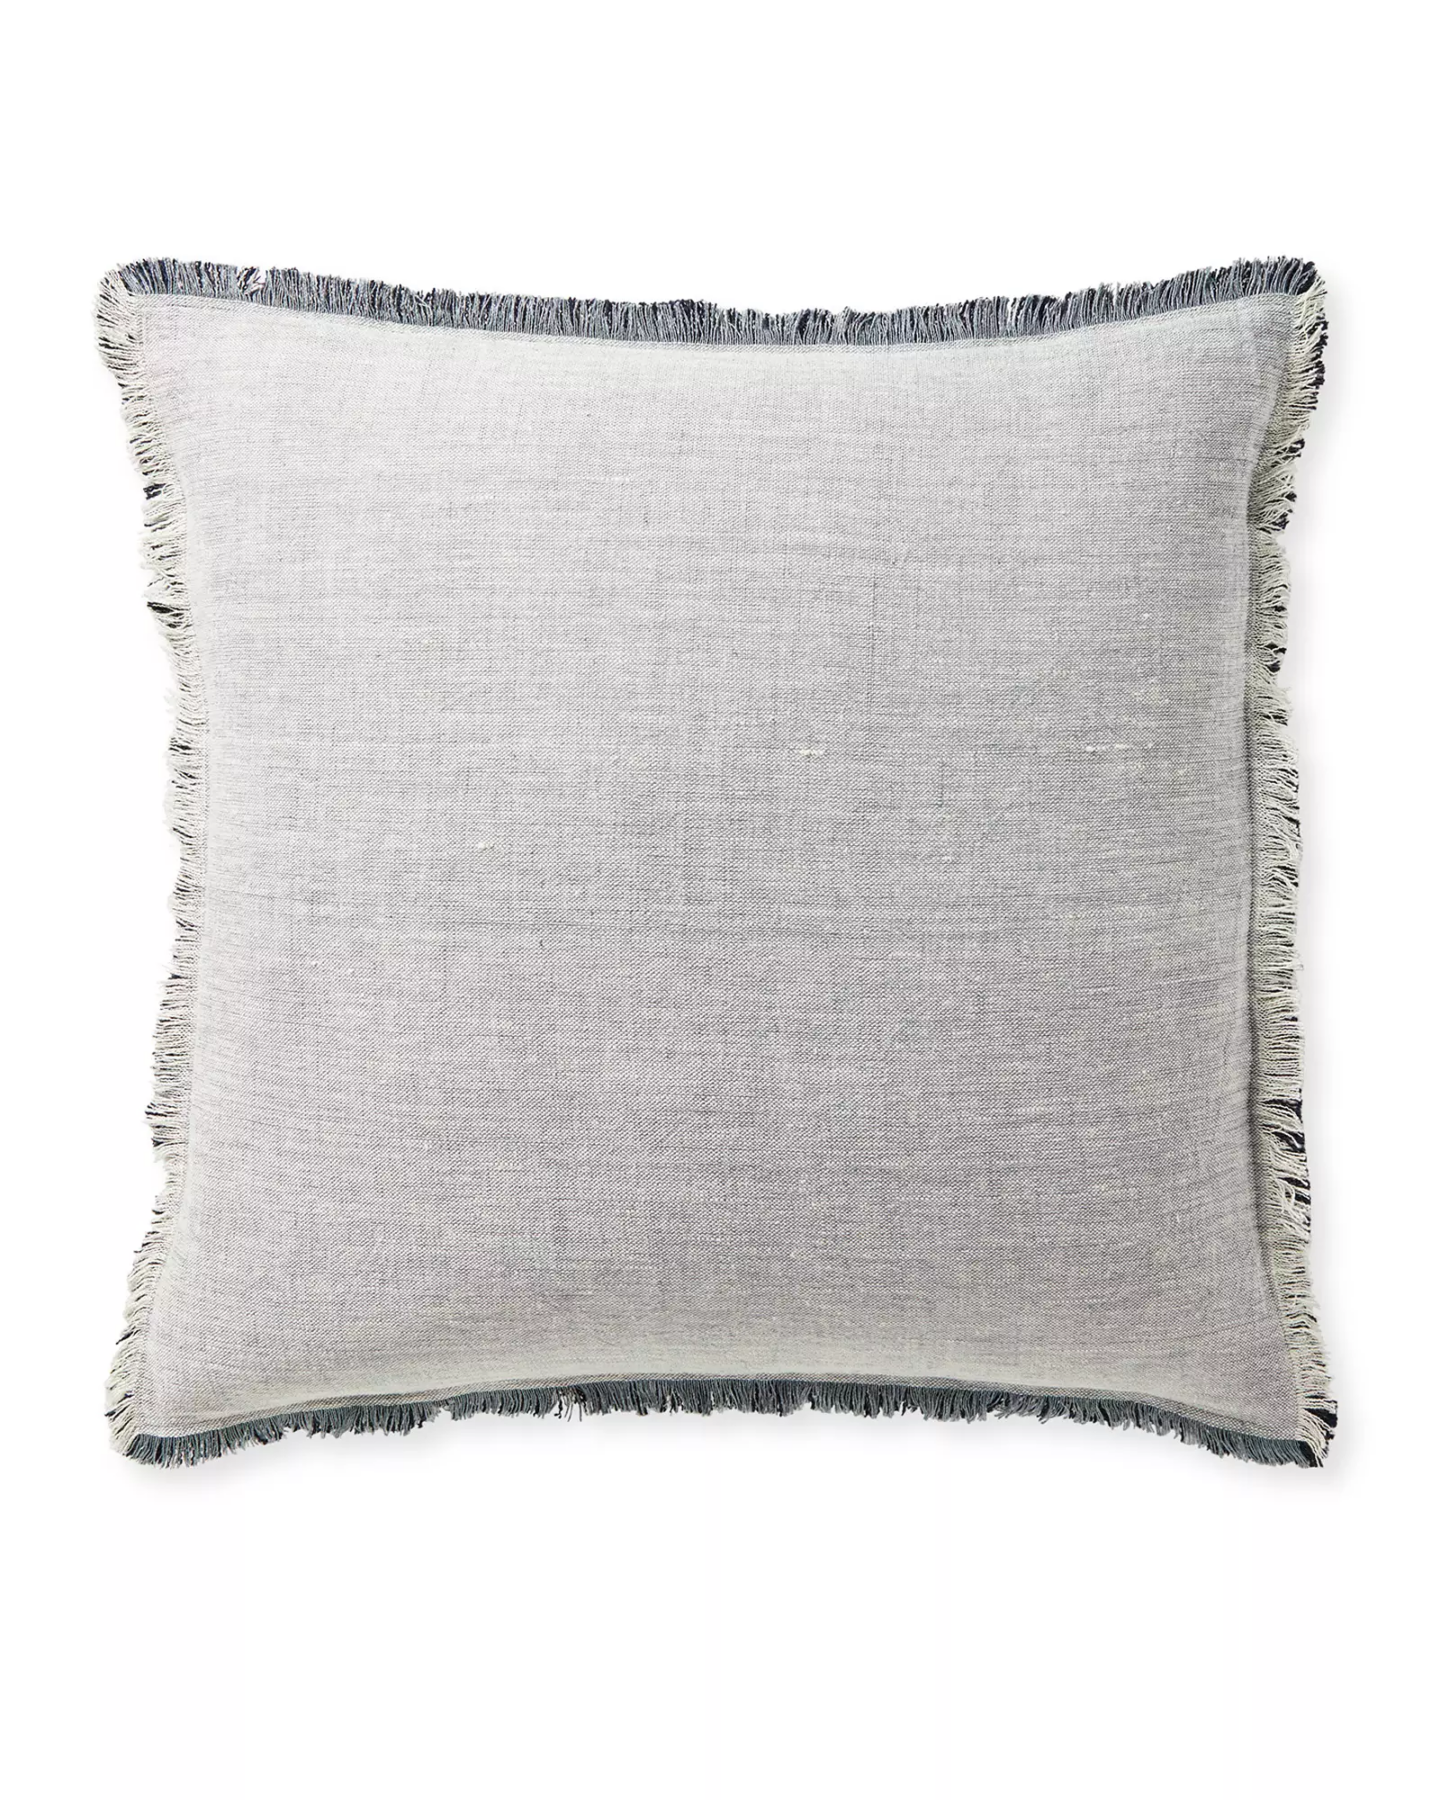 Grey Pillow Cover, Serena & Lily